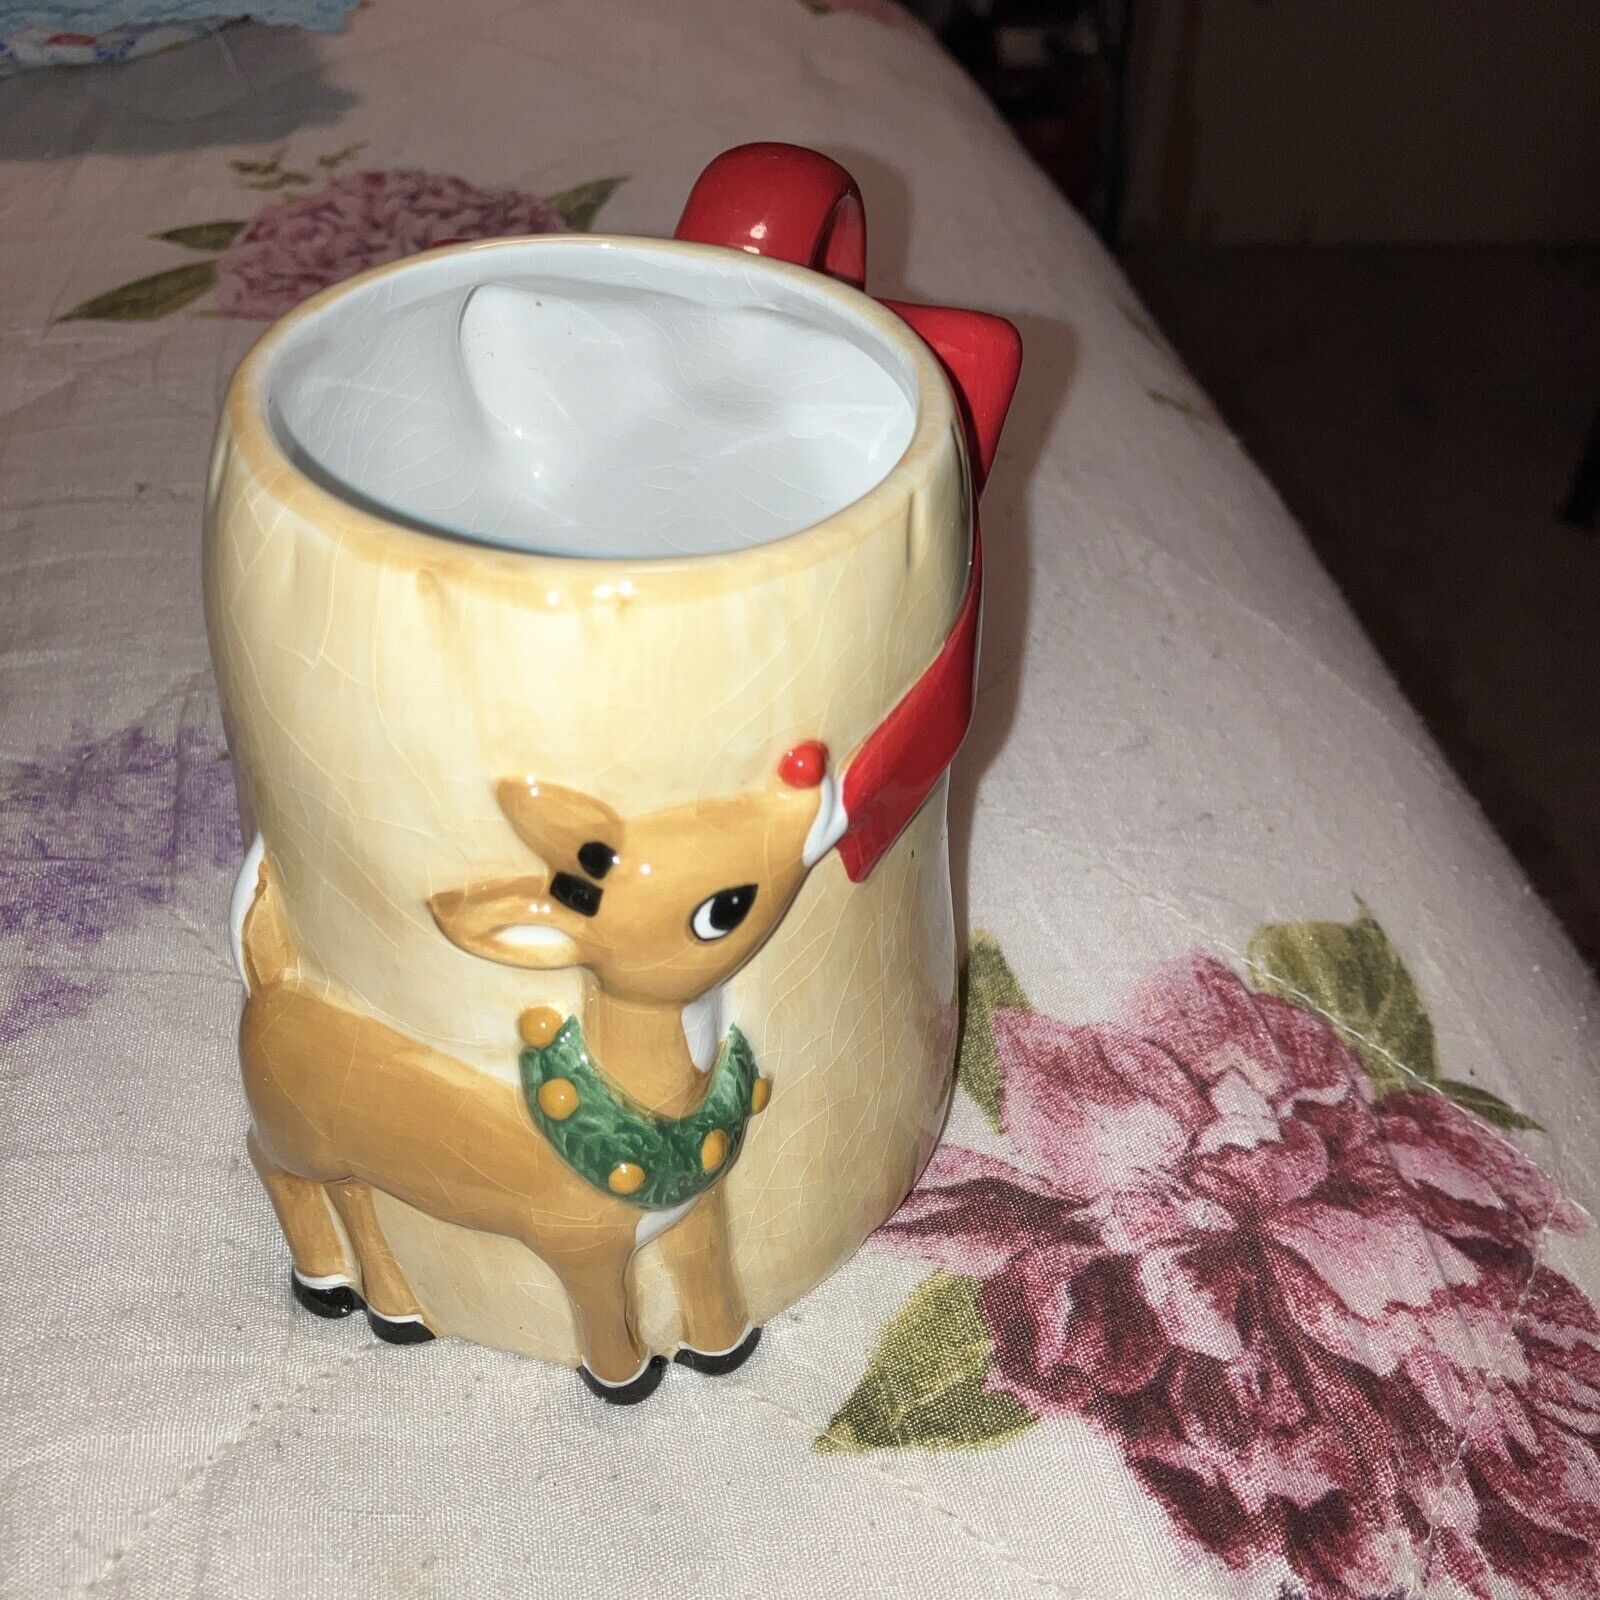 Rudolph the Red Nosed Reindeer Holiday Coffee Mug by Lenox Toy Sack Mug